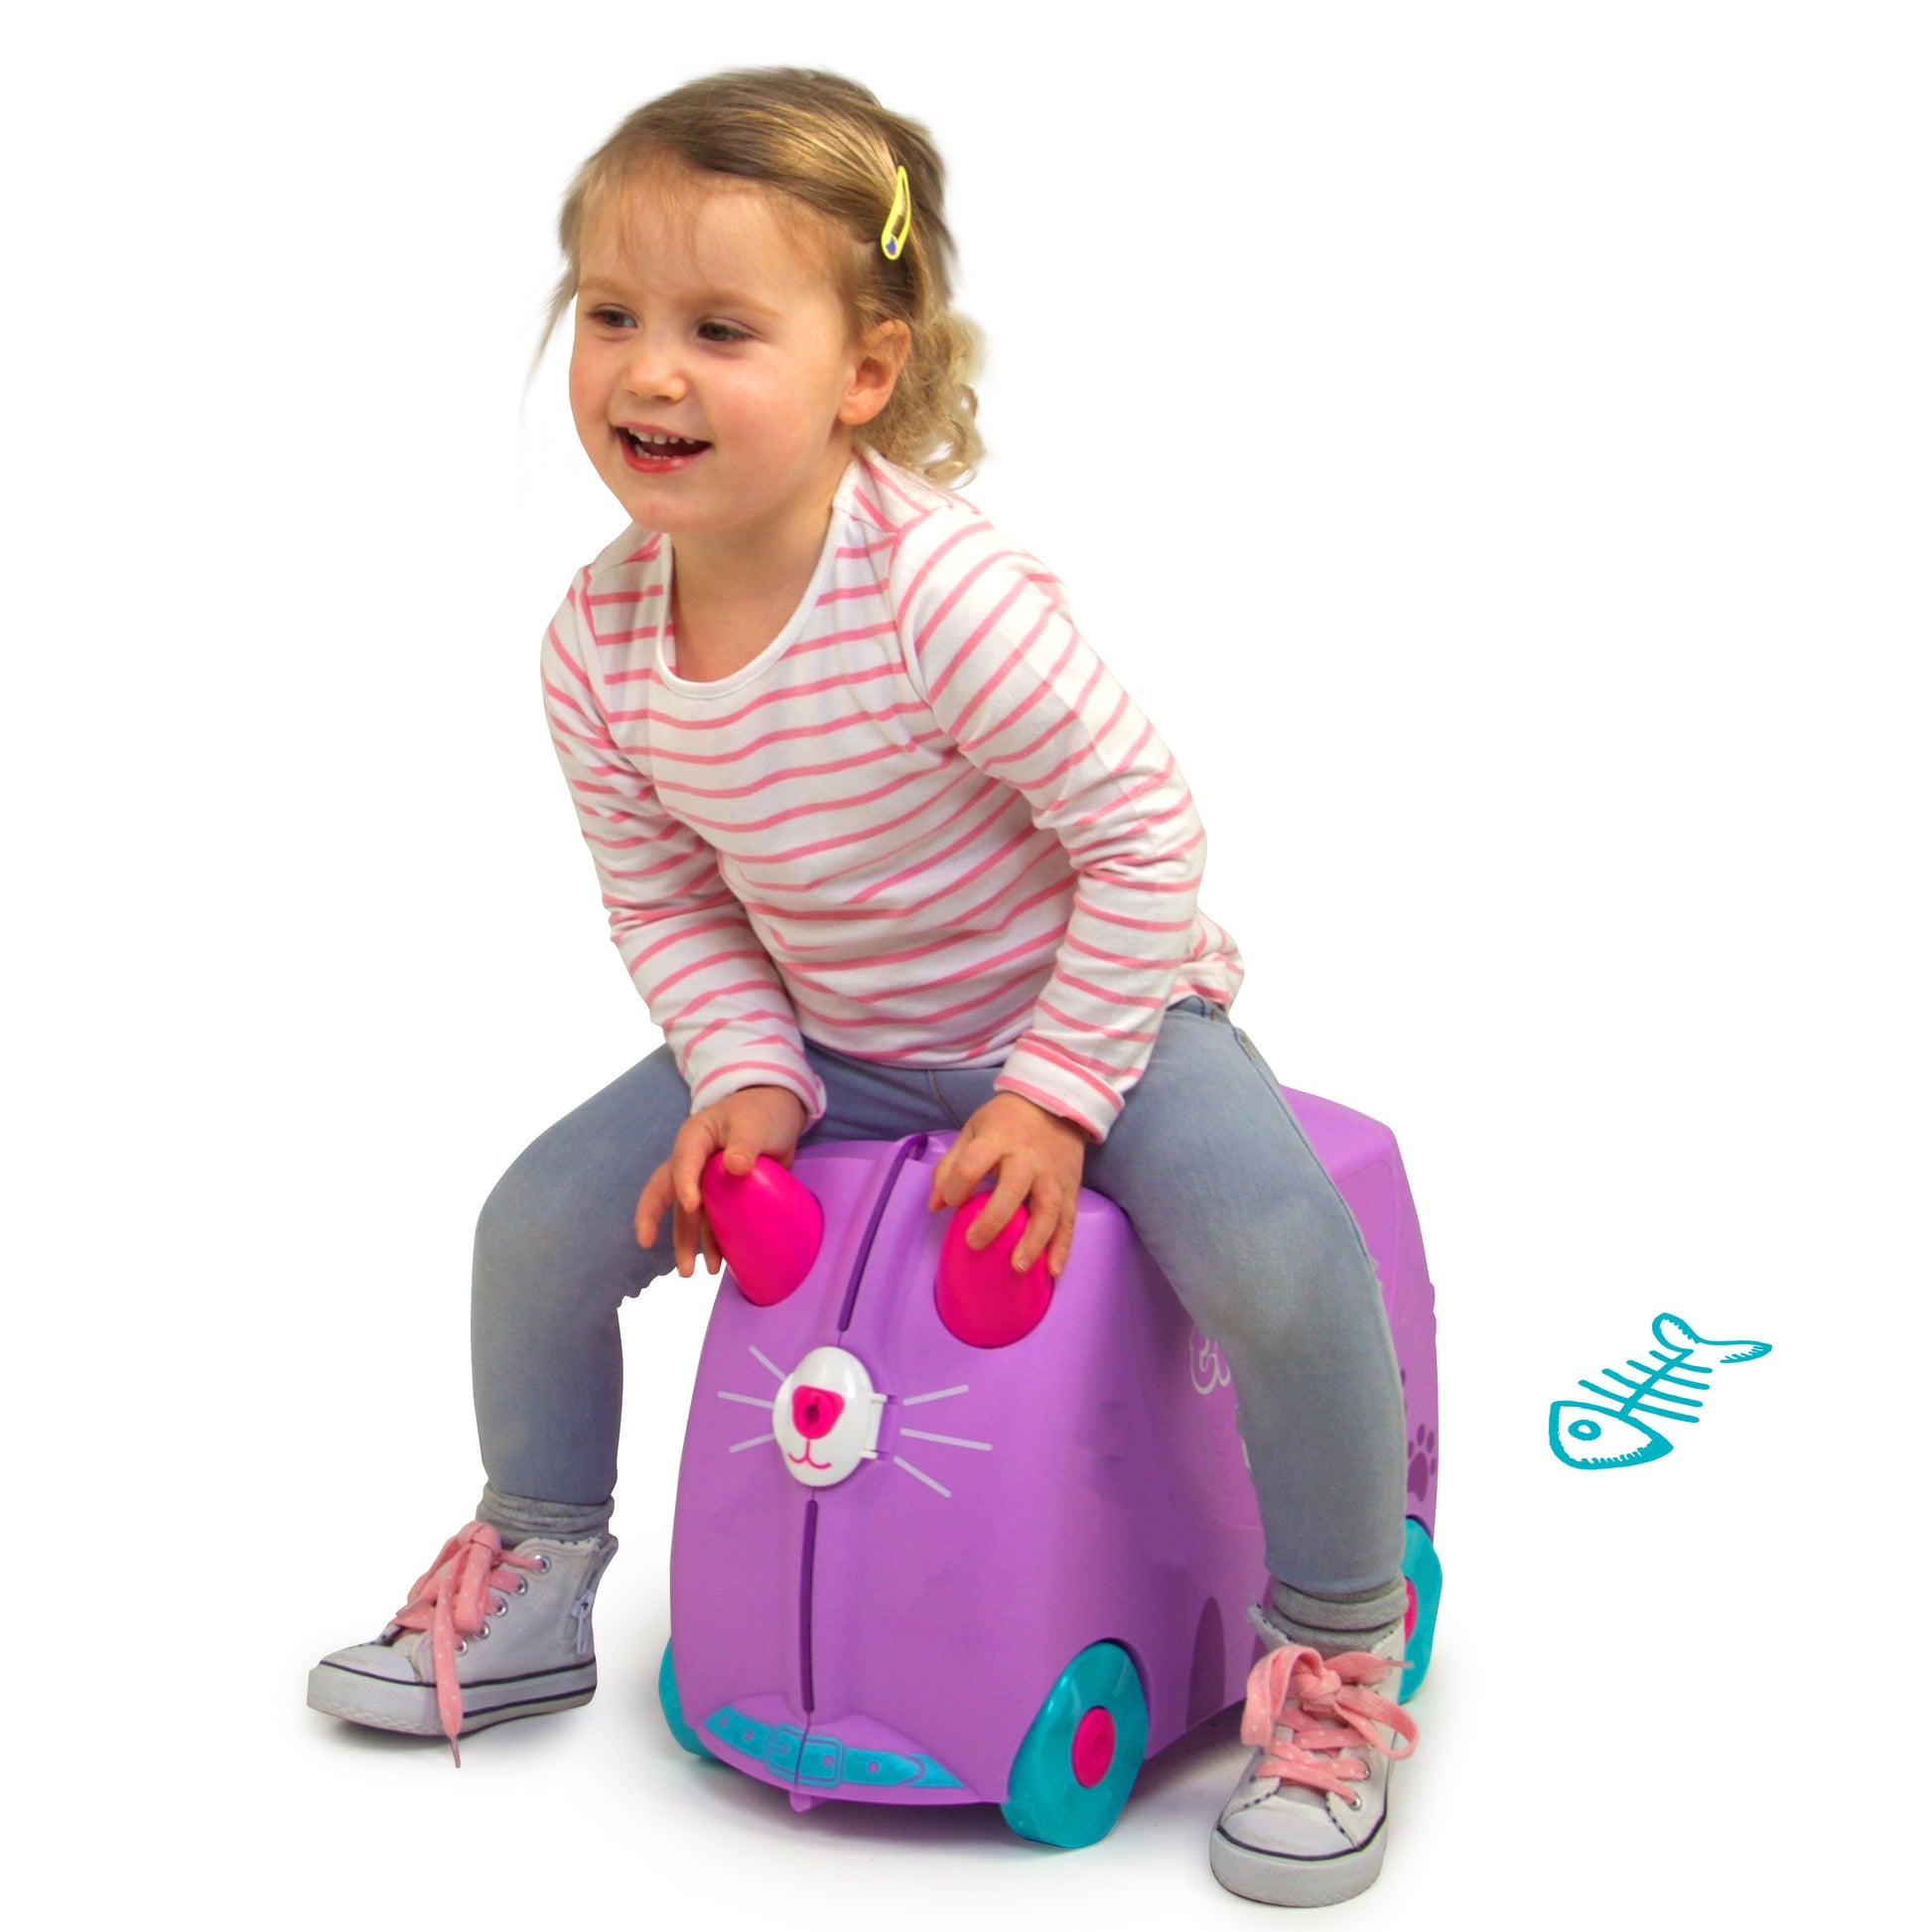 Cassie The Cat Trunki Ride On Luggage